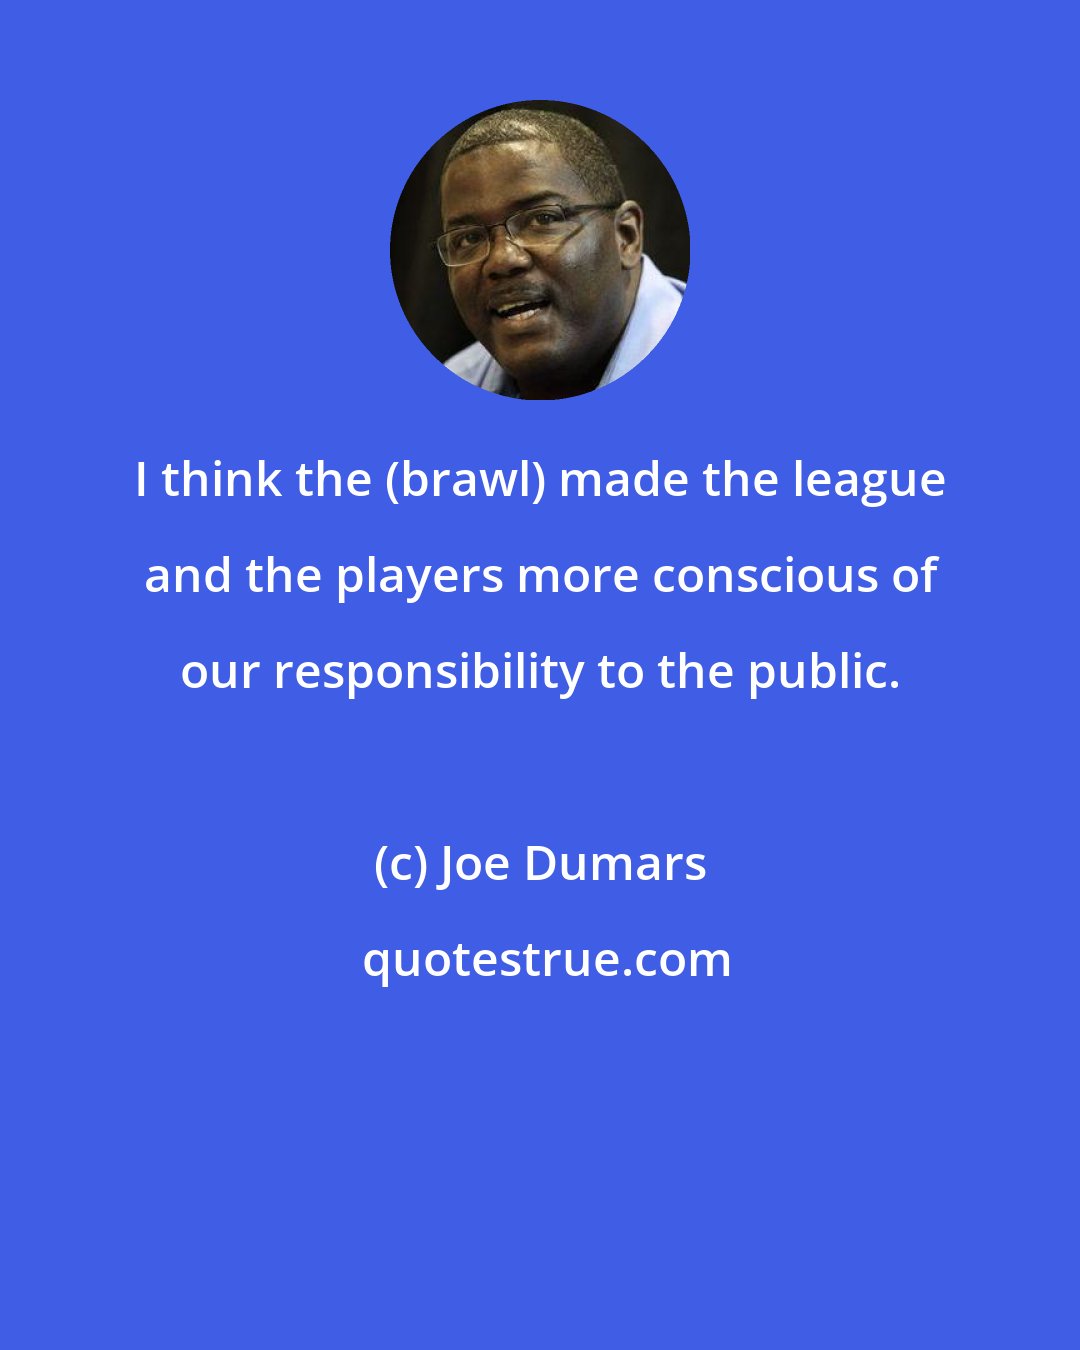 Joe Dumars: I think the (brawl) made the league and the players more conscious of our responsibility to the public.